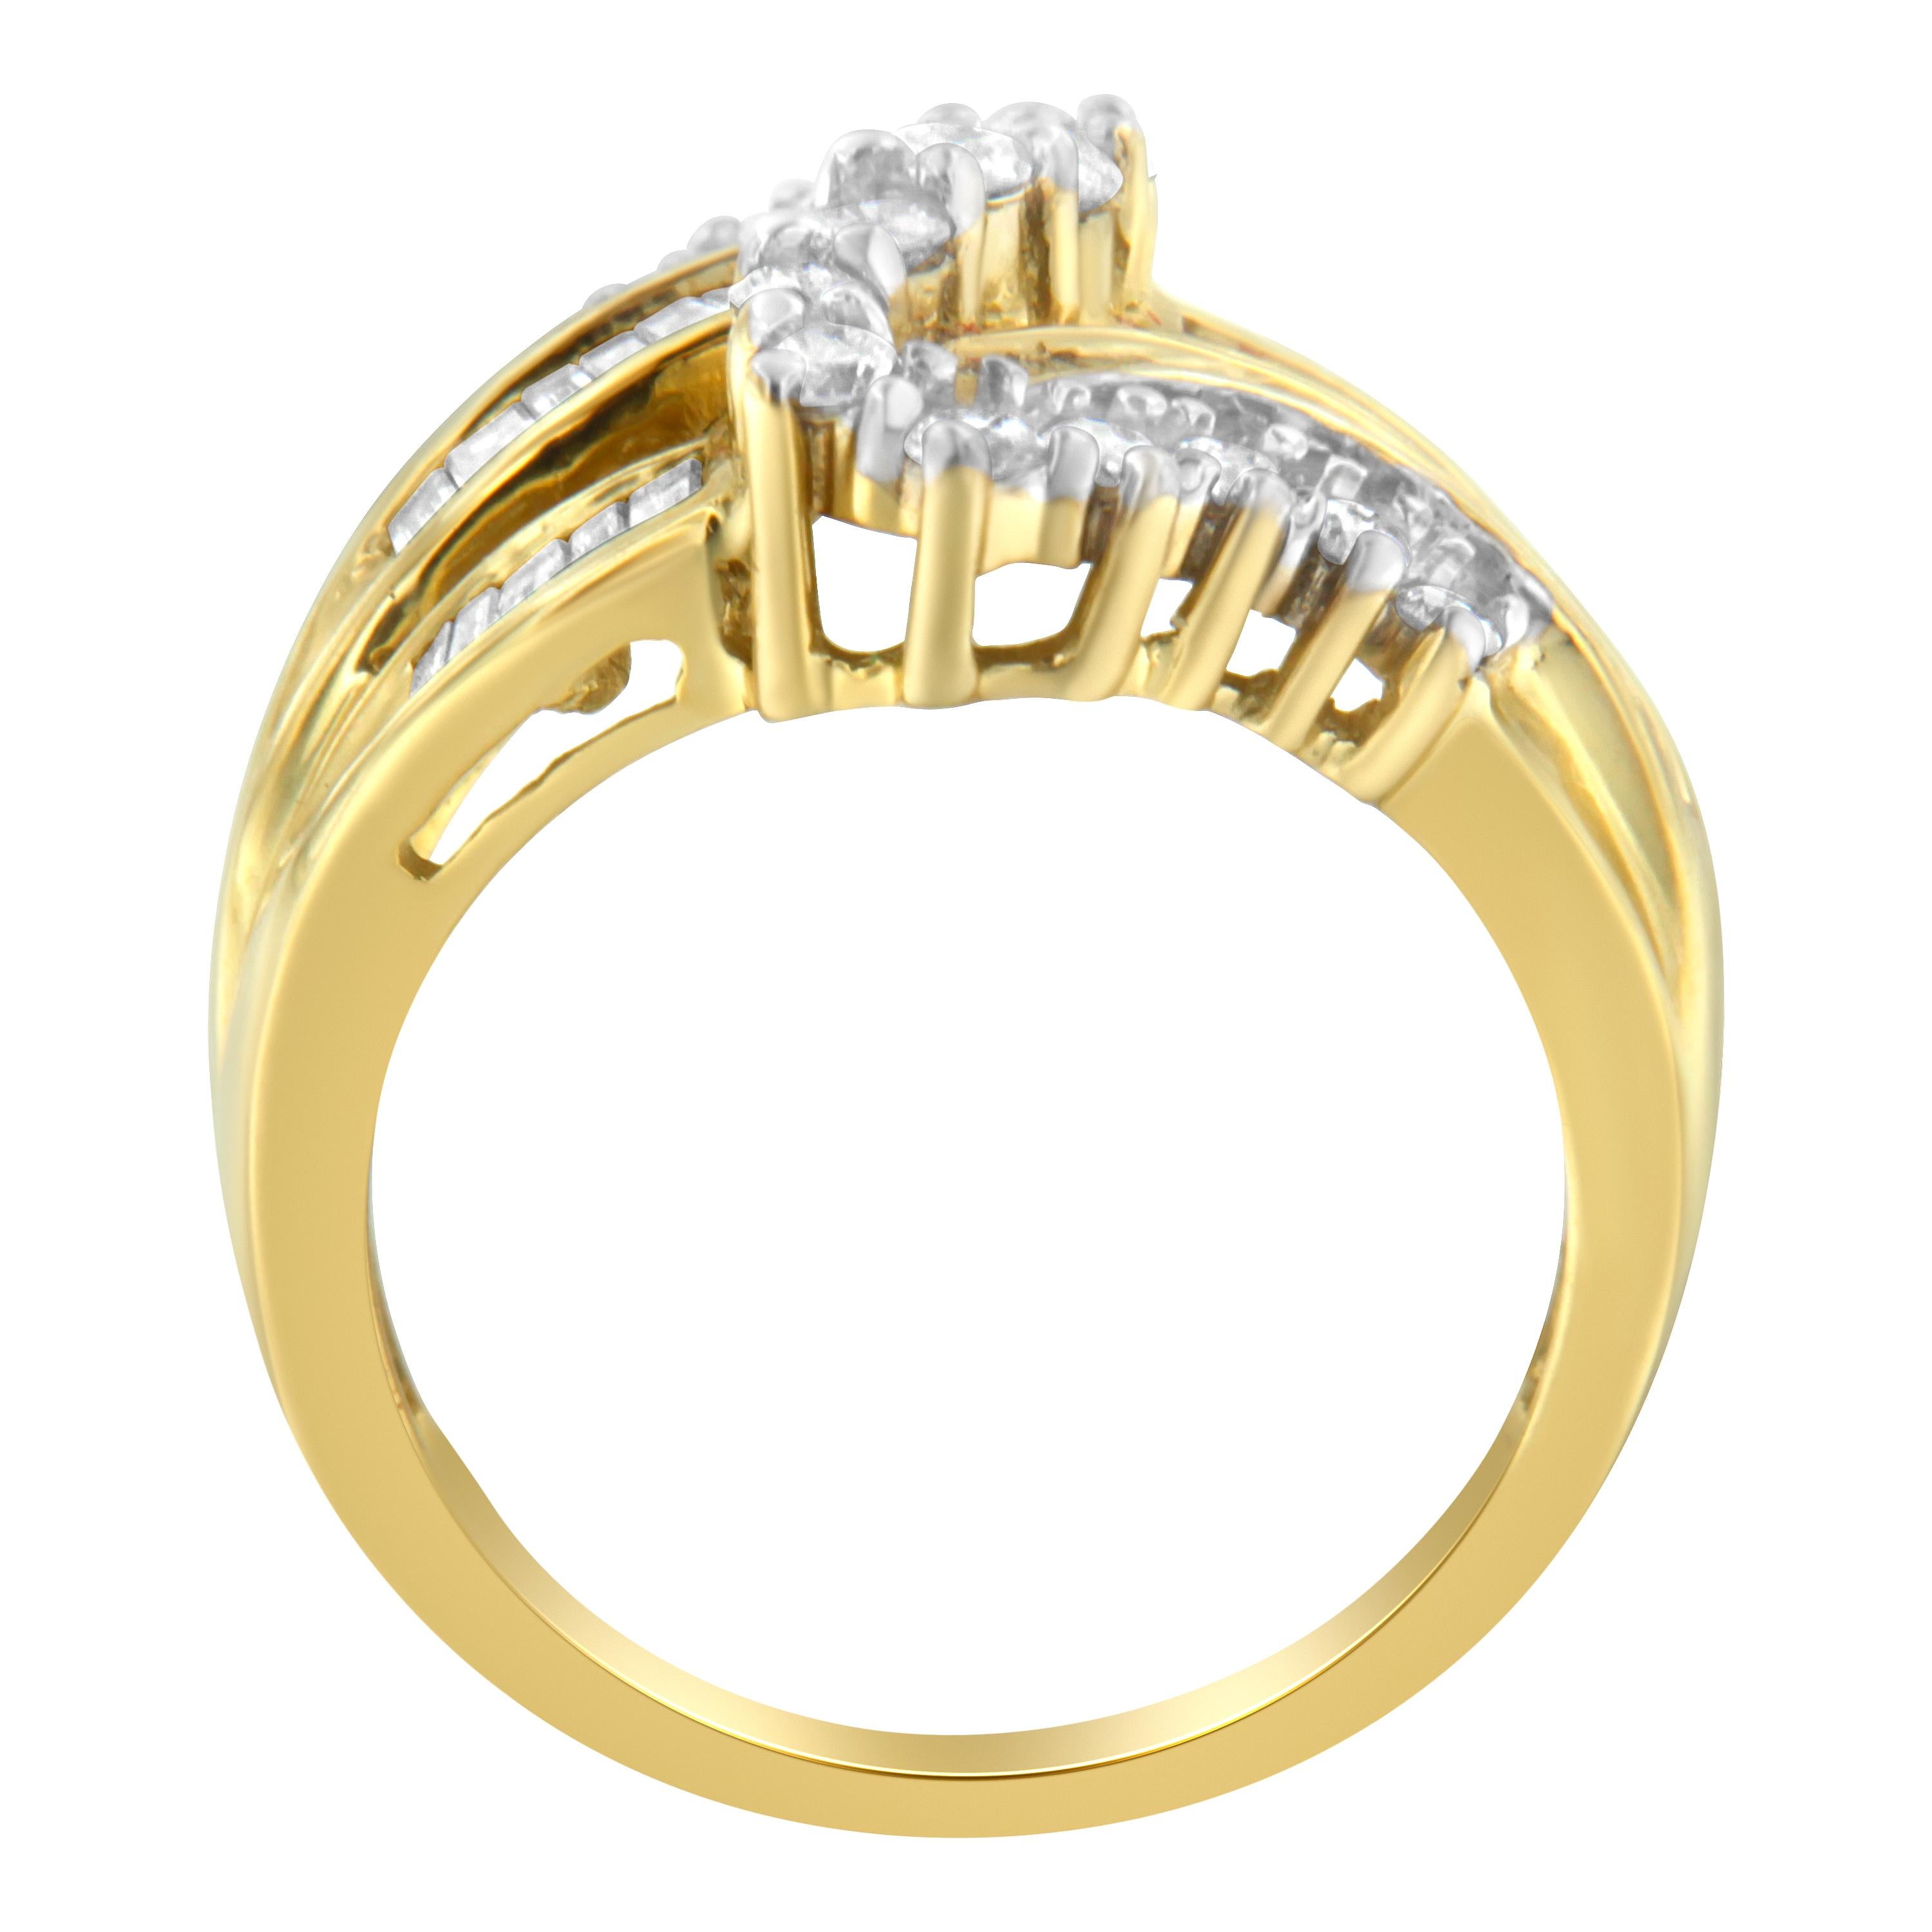 For Sale:  10K Yellow Gold 1.0 Carat Round and Baguette Cut Diamond Bypass Ring 2